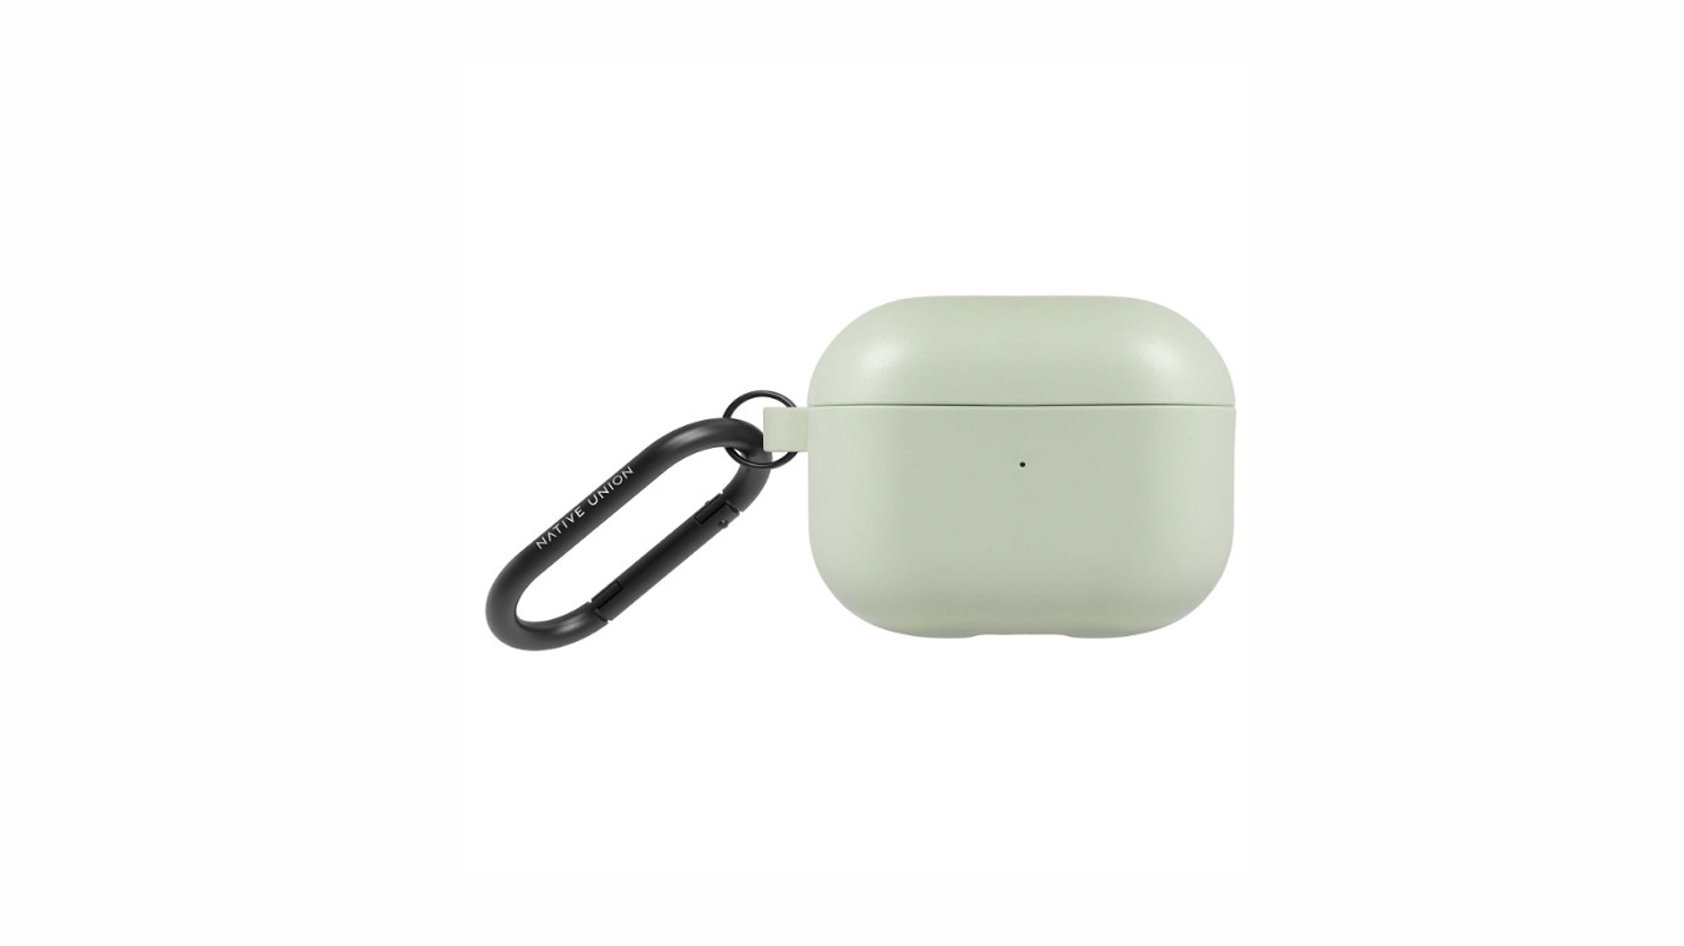 Against a white backdrop the Native Union Roam AirPods Pro case is shown in a mint green.